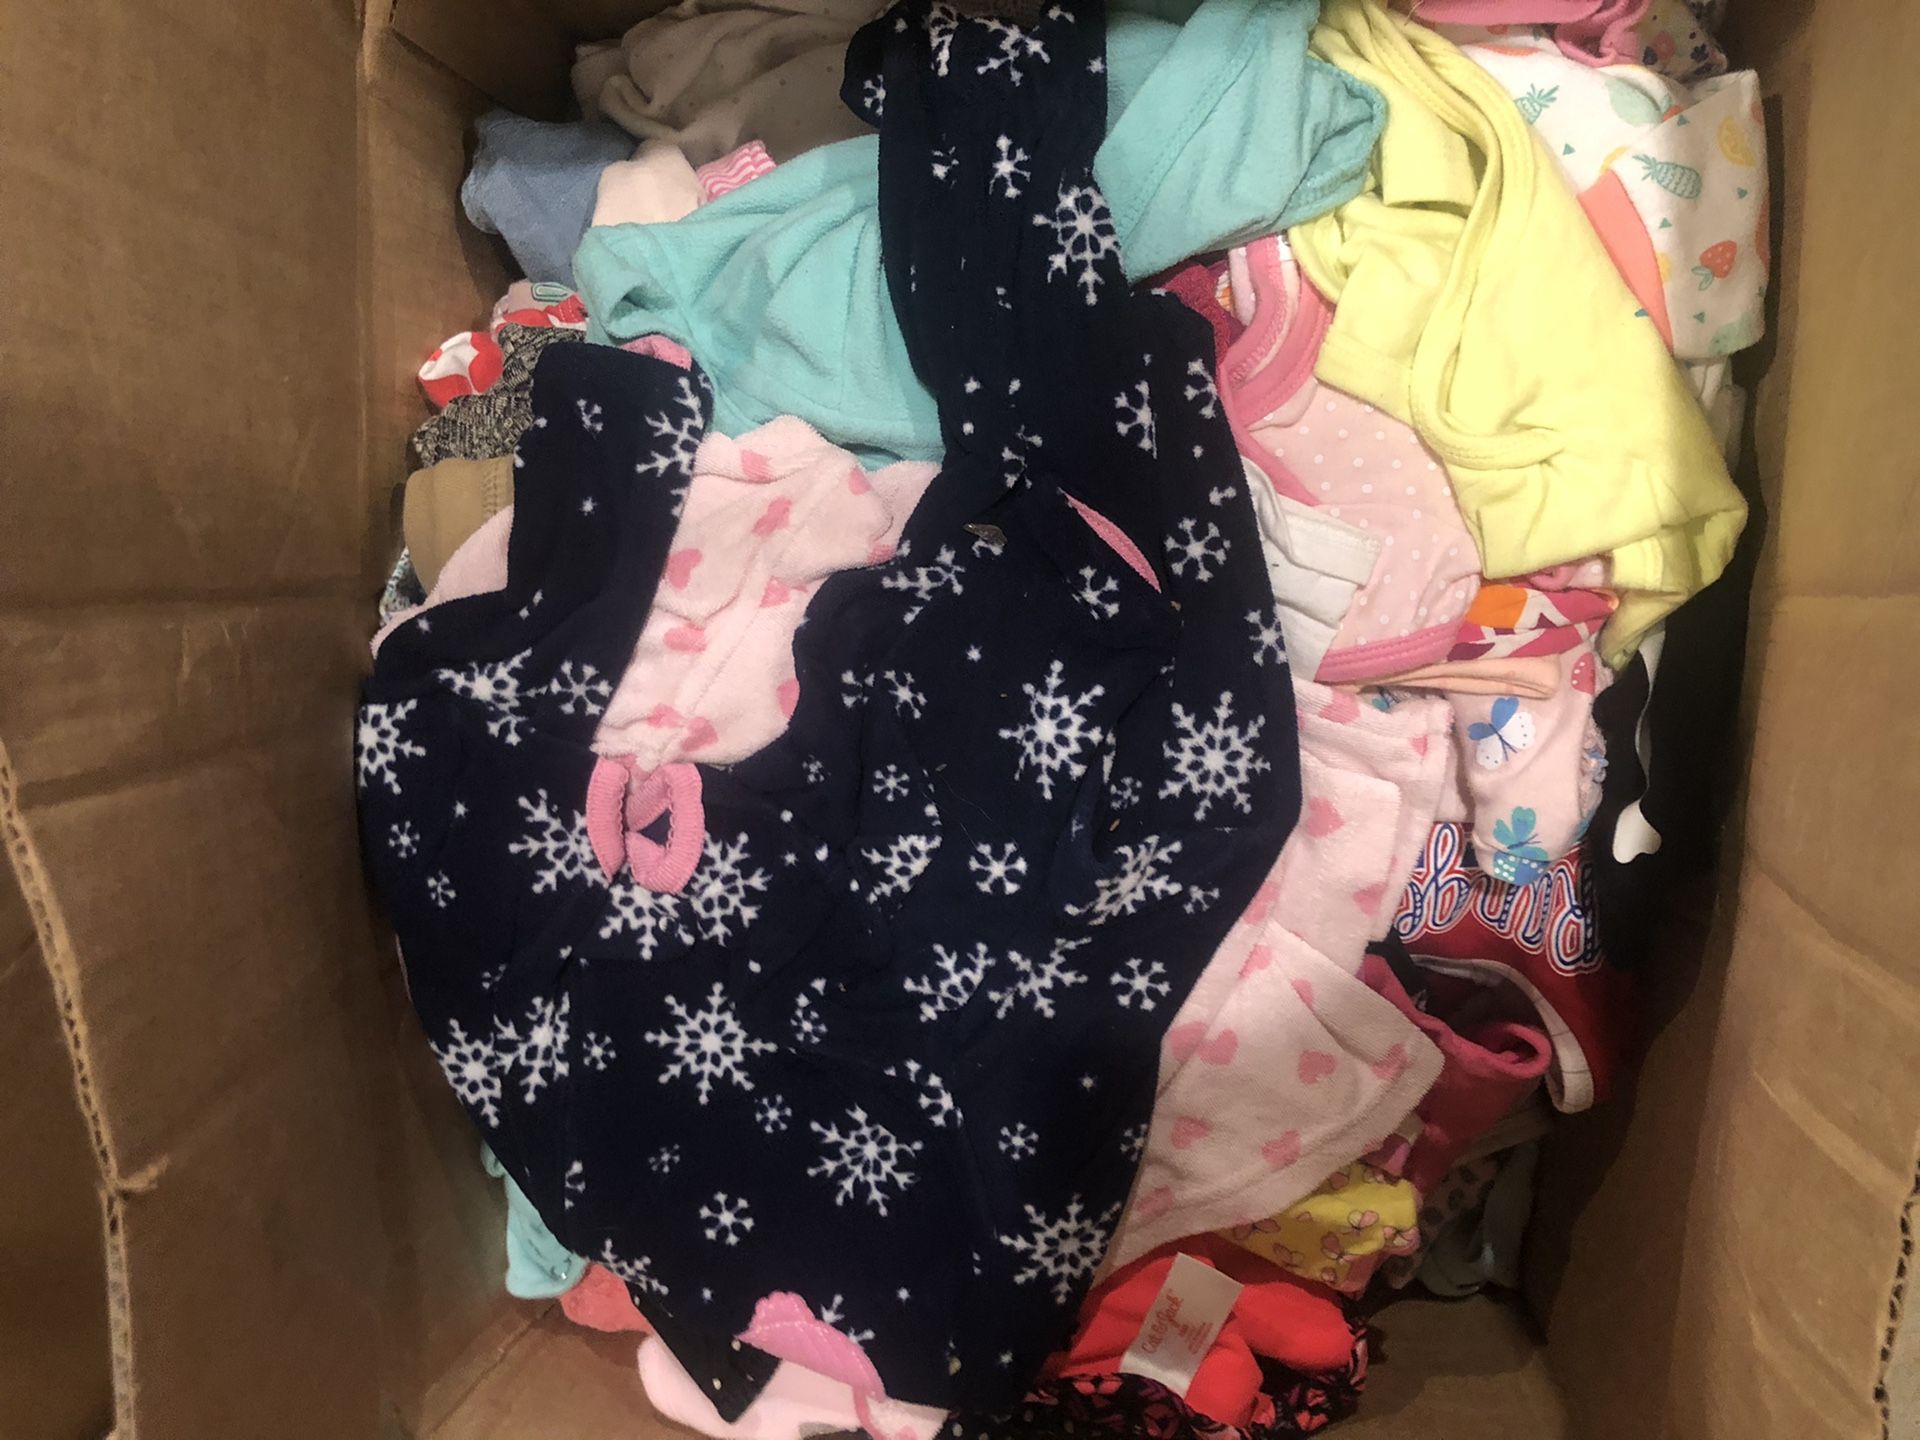 Box of gently used baby girl clothes size newborn to 24 months